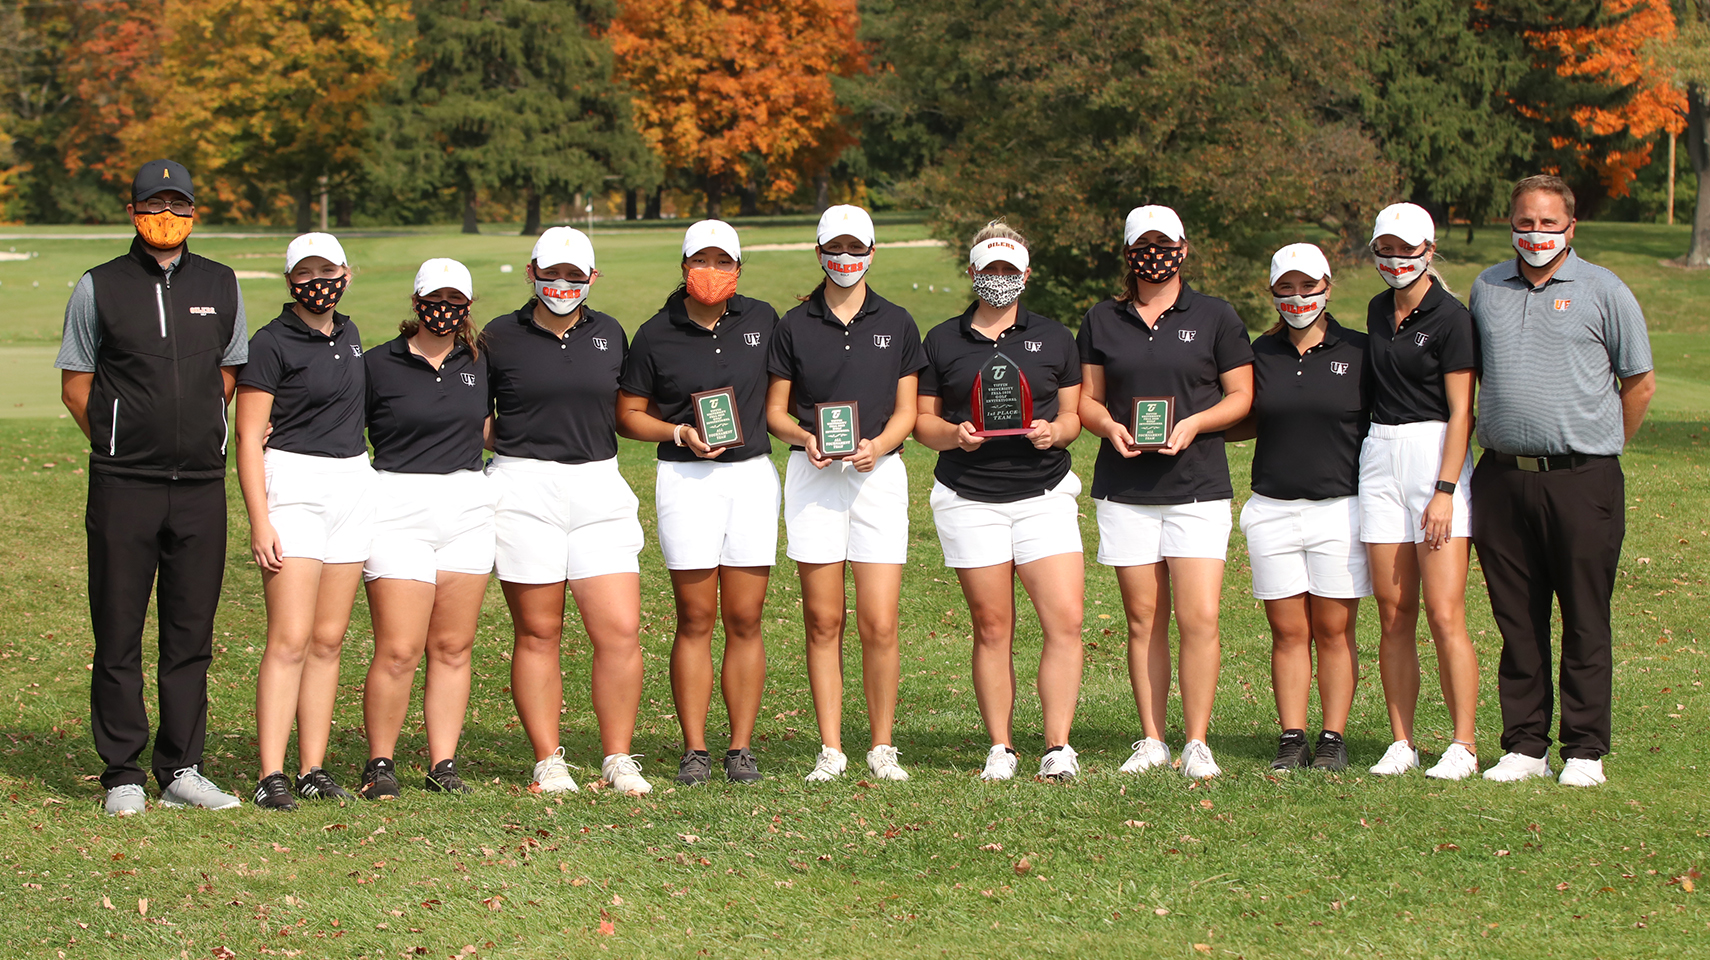 Women's golf team champions at Tiffin Fall Invitational. They are standing holding a trophy.